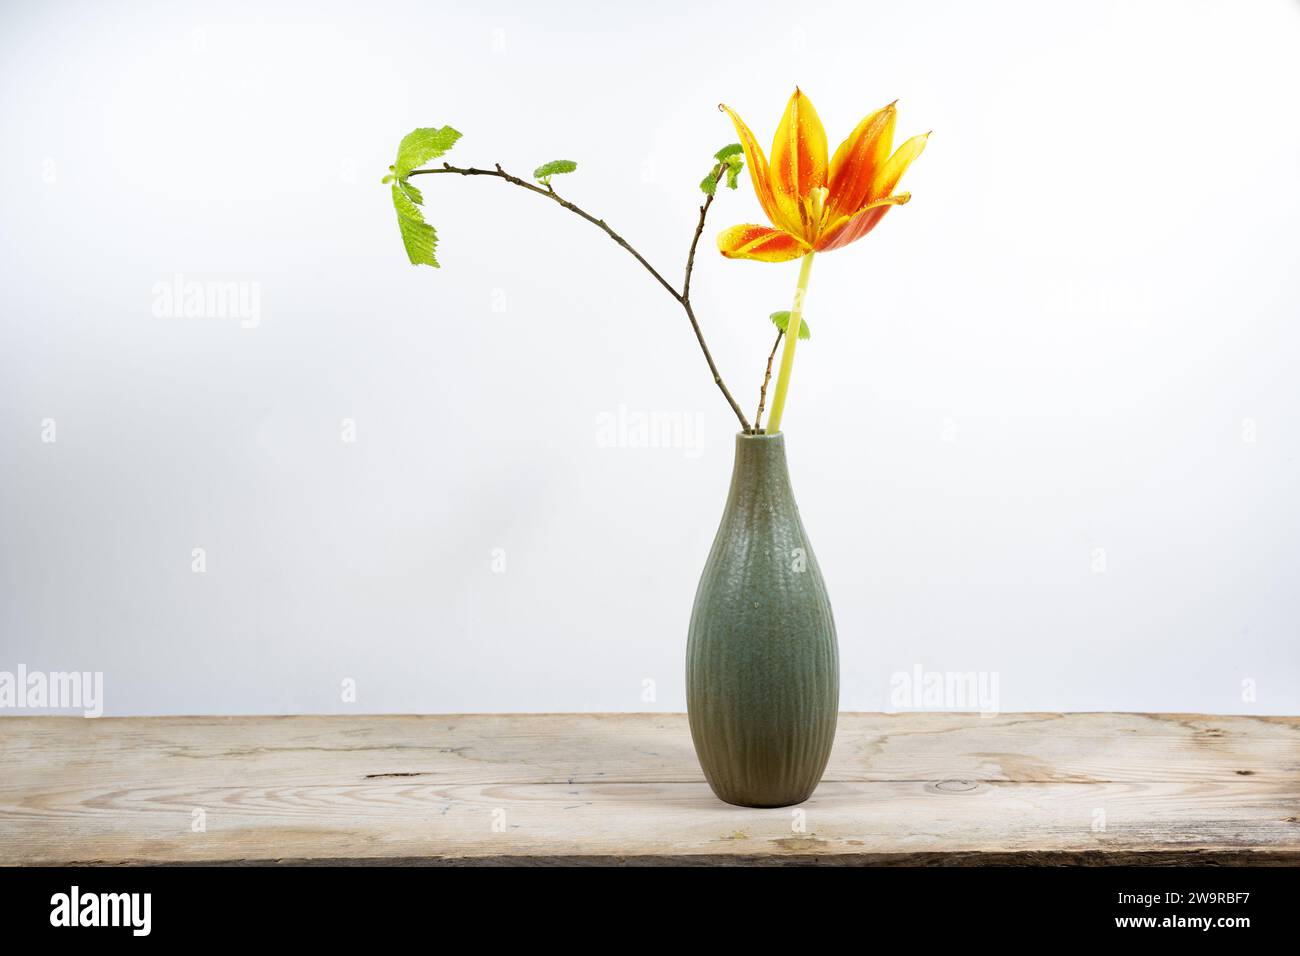 Single orange tulip flower and a spring branch in a small vase on a wooden board against a light background, seasonal decoration, copy space, selected Stock Photo